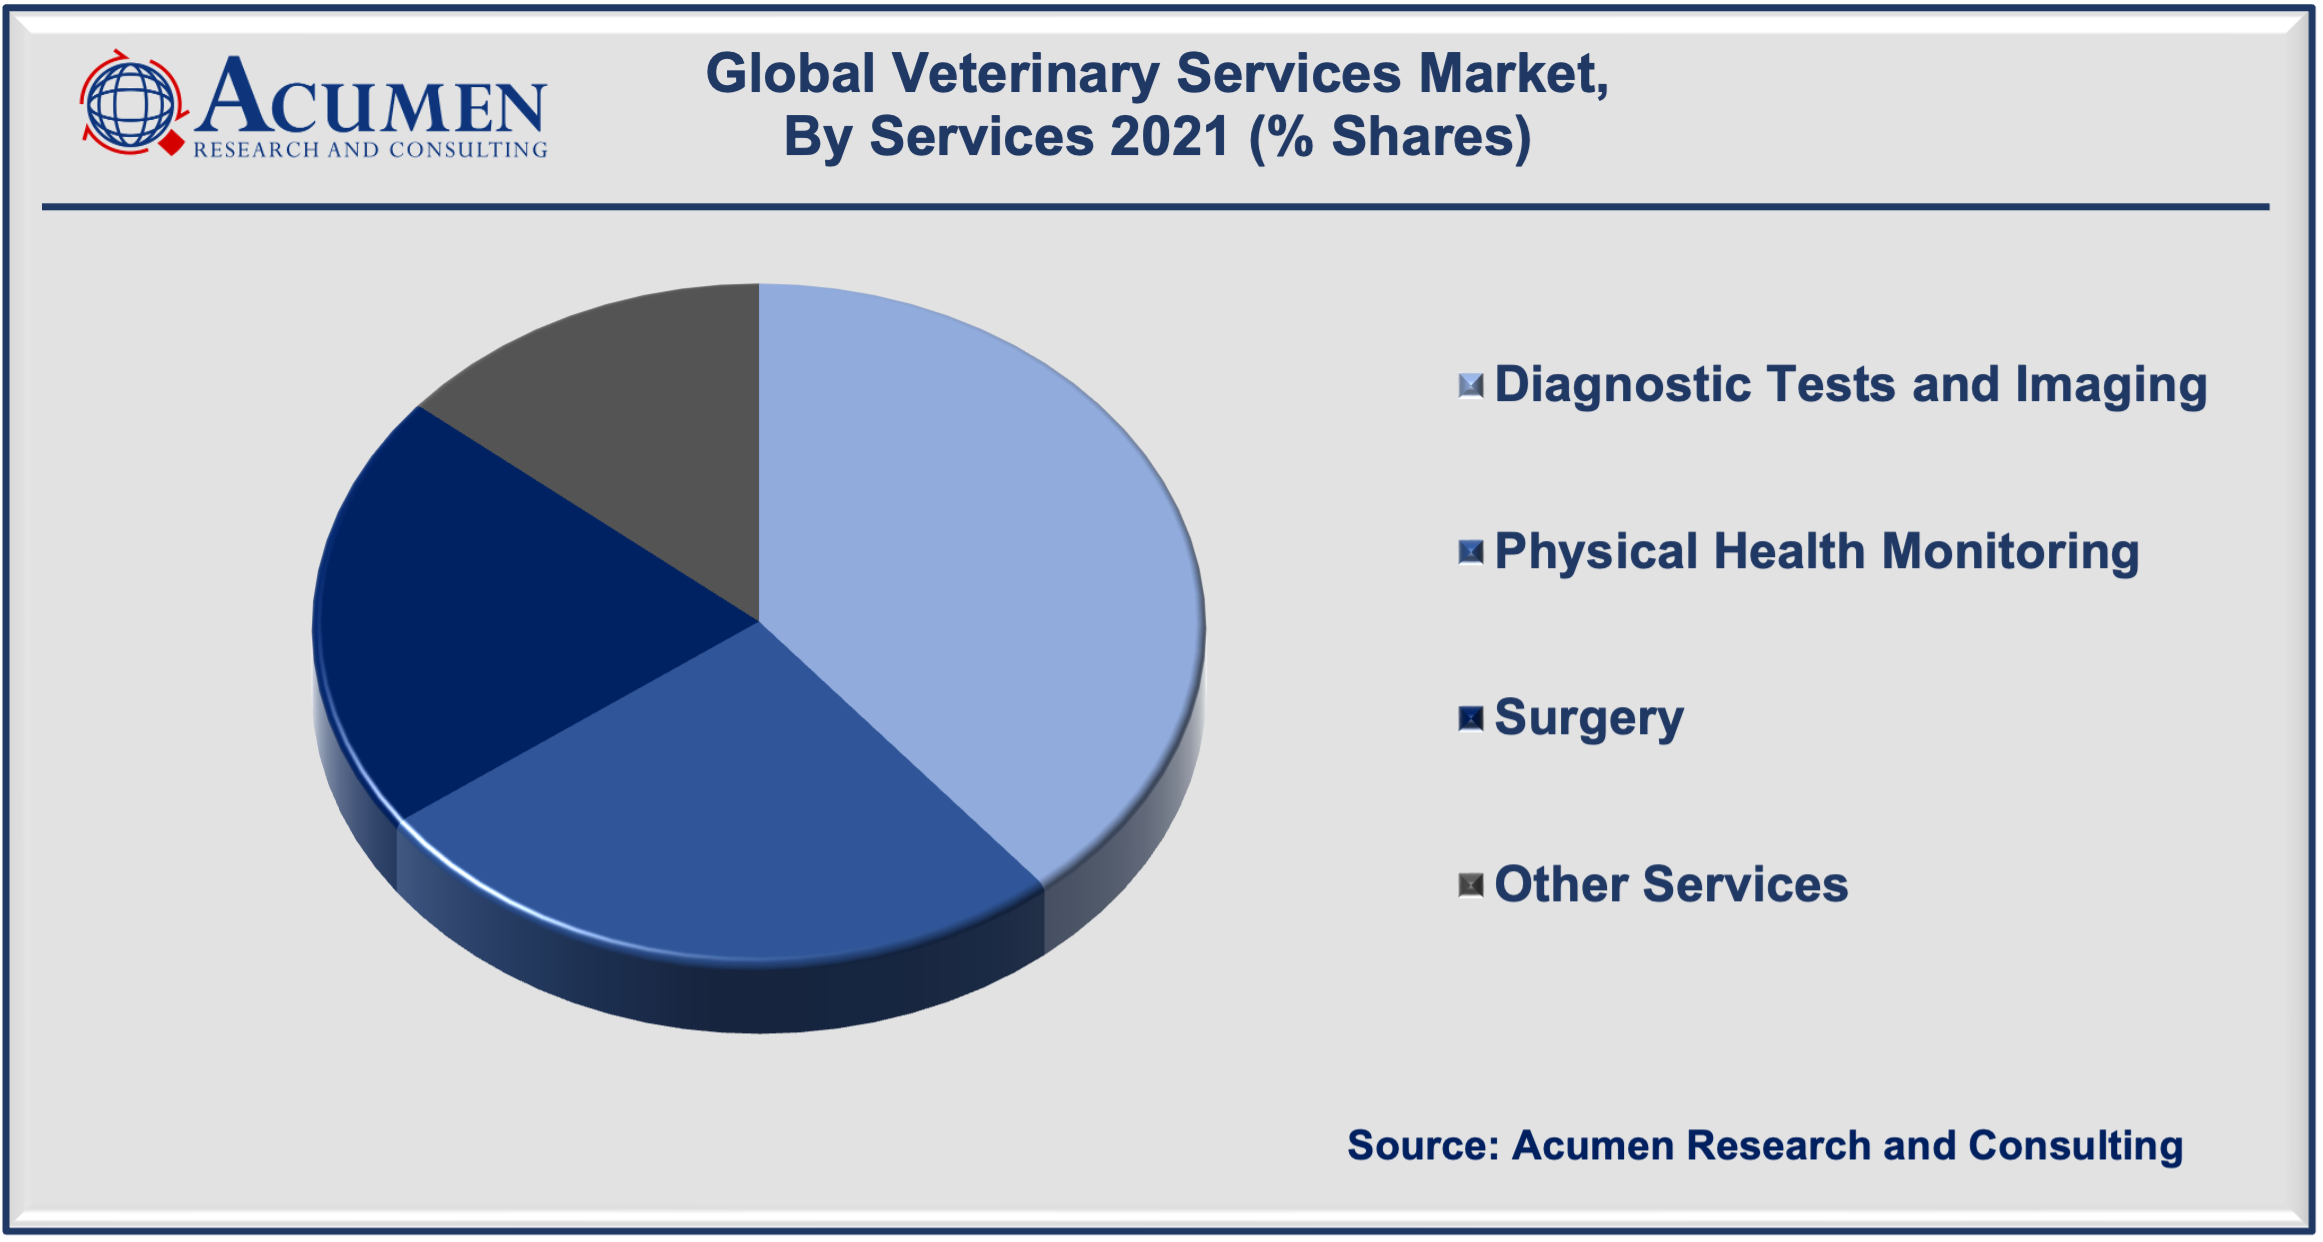 Veterinary Services Market Analysis accounted for USD 99.5 Billion in 2021 and is expected to reach USD 162.5 Billion by 2030 growing at a CAGR of 5.8% during the forecast timeframe from 2022 to 2030.